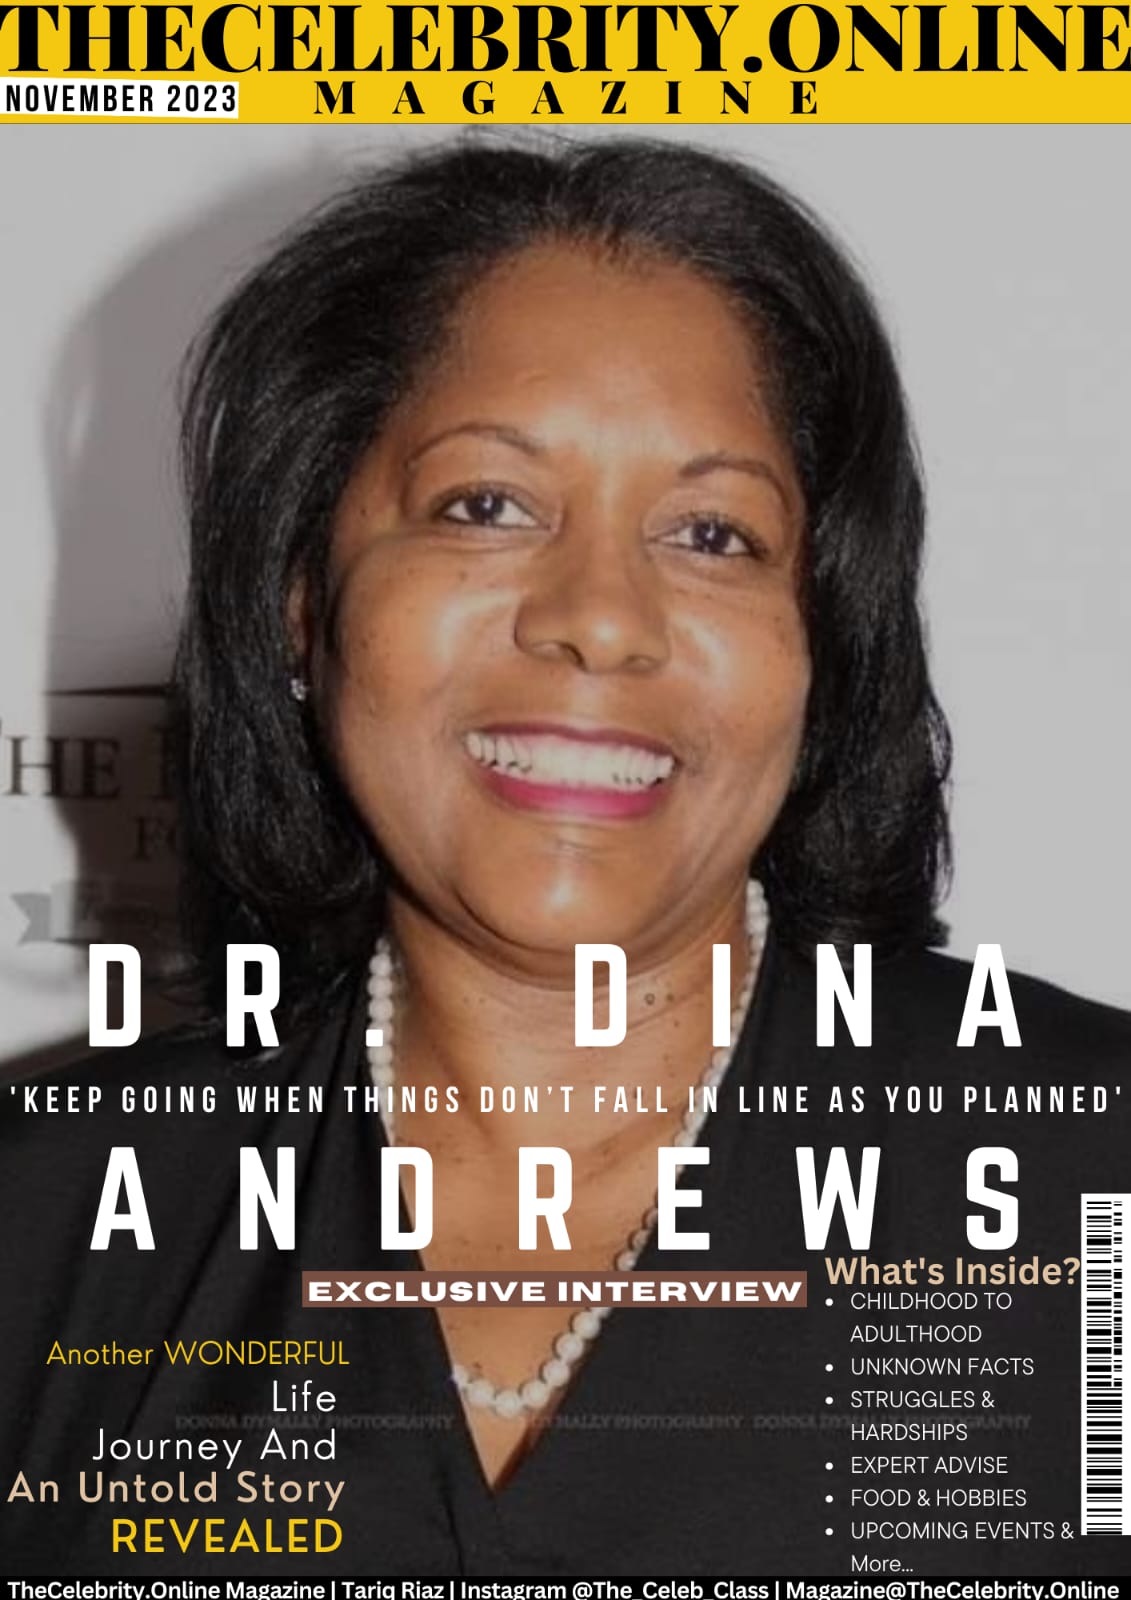 Dr. Dina Andrews Exclusive Interview – ‘Keep Going When Things Don’t Fall In Line As You Planned’